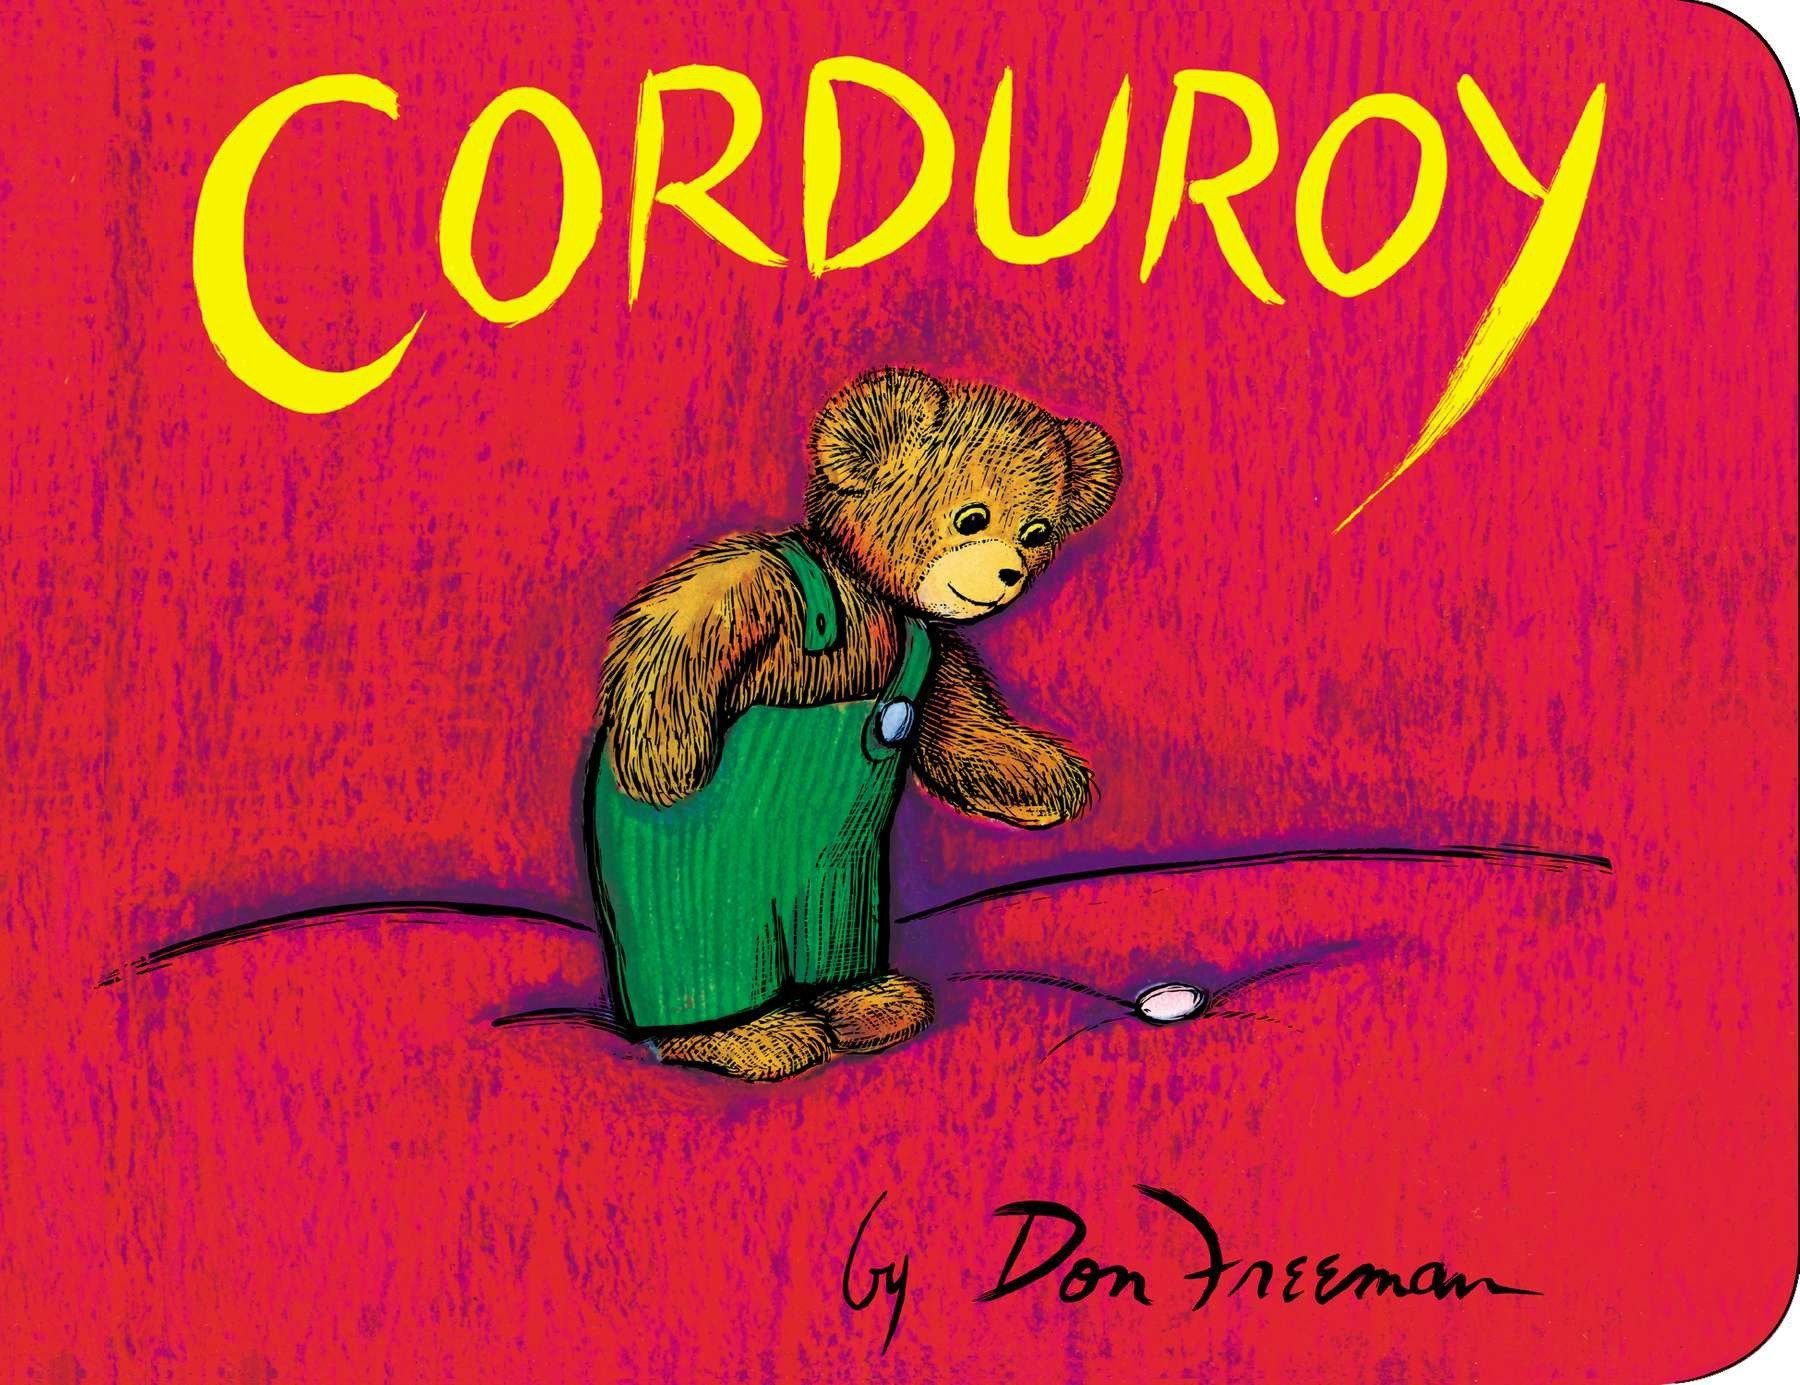 <p><strong>$4.76</strong></p><p>You may remember <em>Corduroy</em> from your own childhood, so carry on the engaging storytime tradition with your own little one. When you're done with this one, <a href="https://www.amazon.com/dp/B0B2NXLQ4T?tag=syndication-20&ascsubtag=%5Bartid%7C10055.g.44474533%5Bsrc%7Cmsn-us">shop the other 28 Corduroy stories</a>. </p>